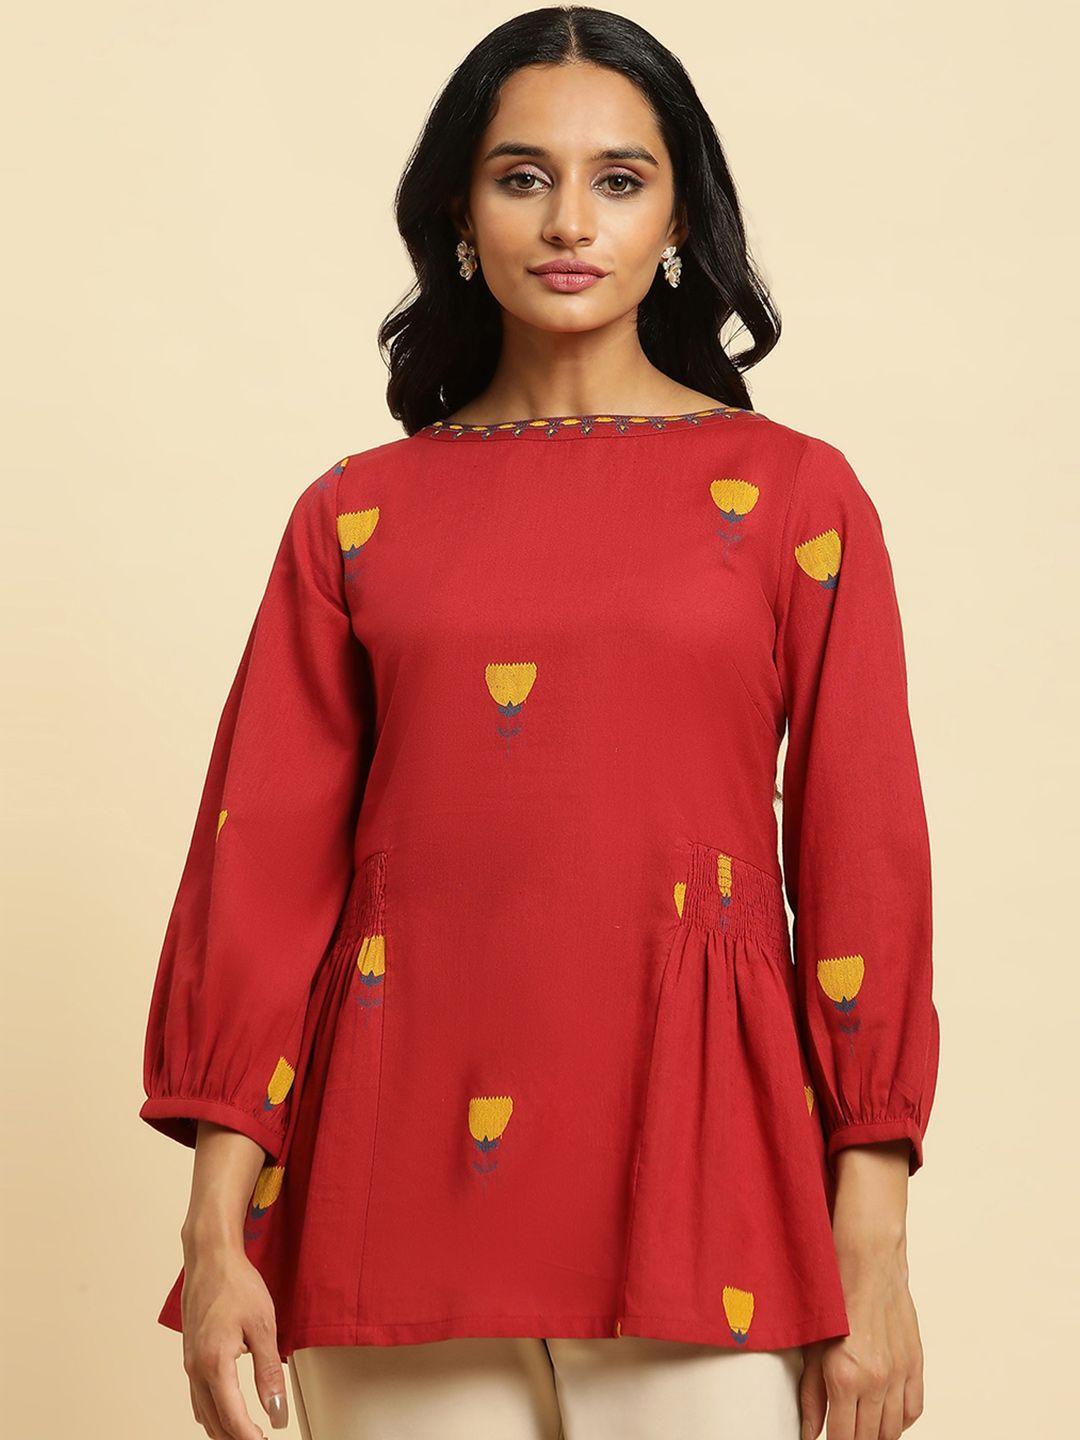 w red floral printed puffed sleeves smocking pure cotton peplum top